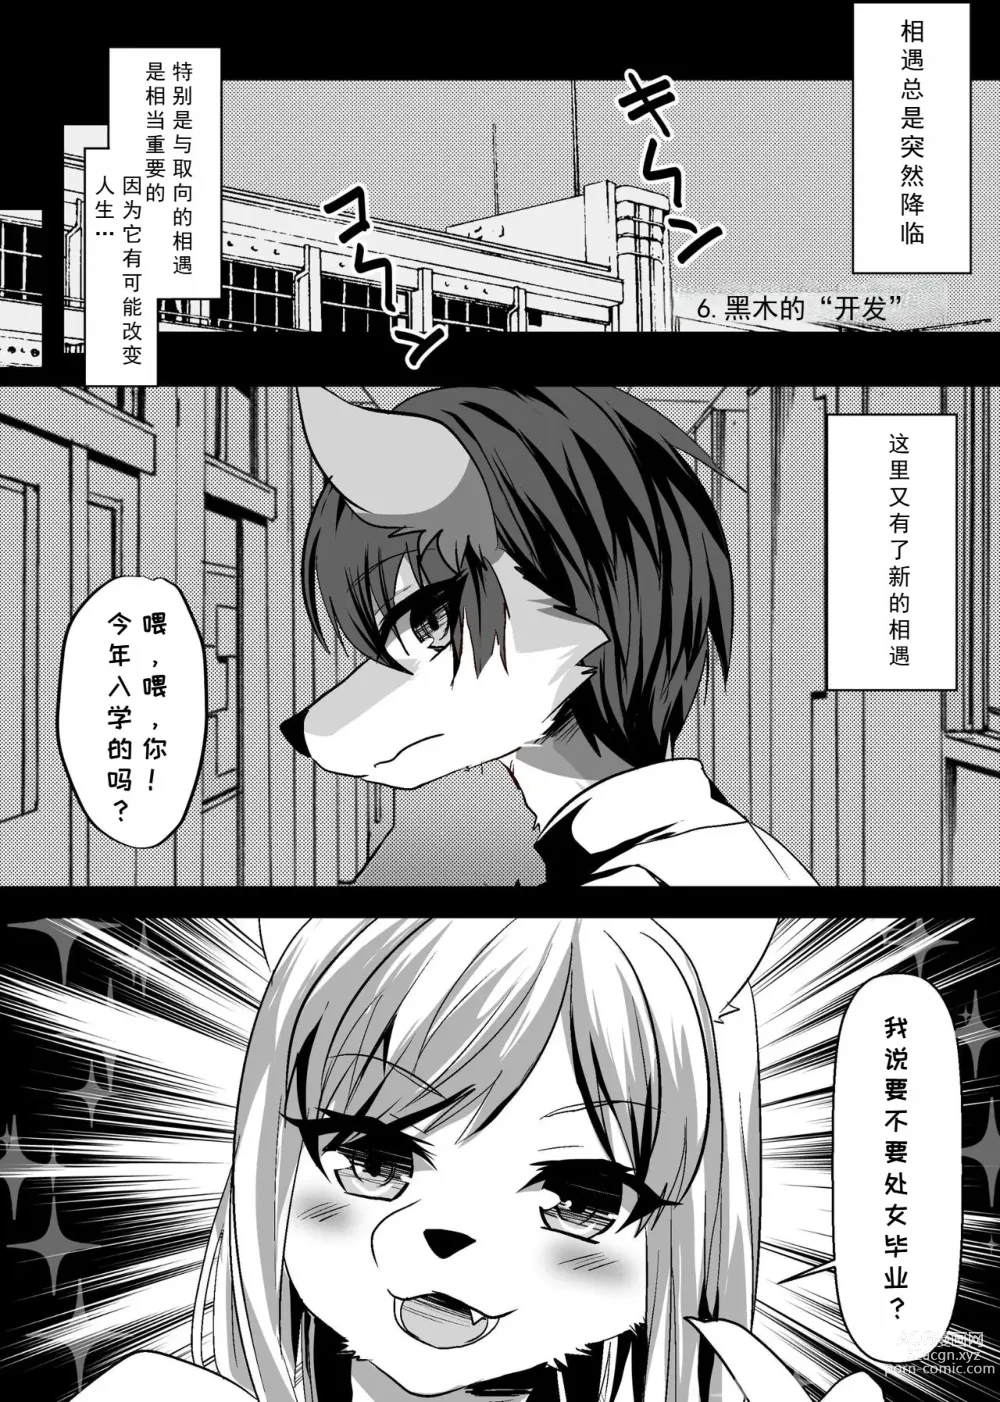 Page 3 of doujinshi 我们发情出勤科 3